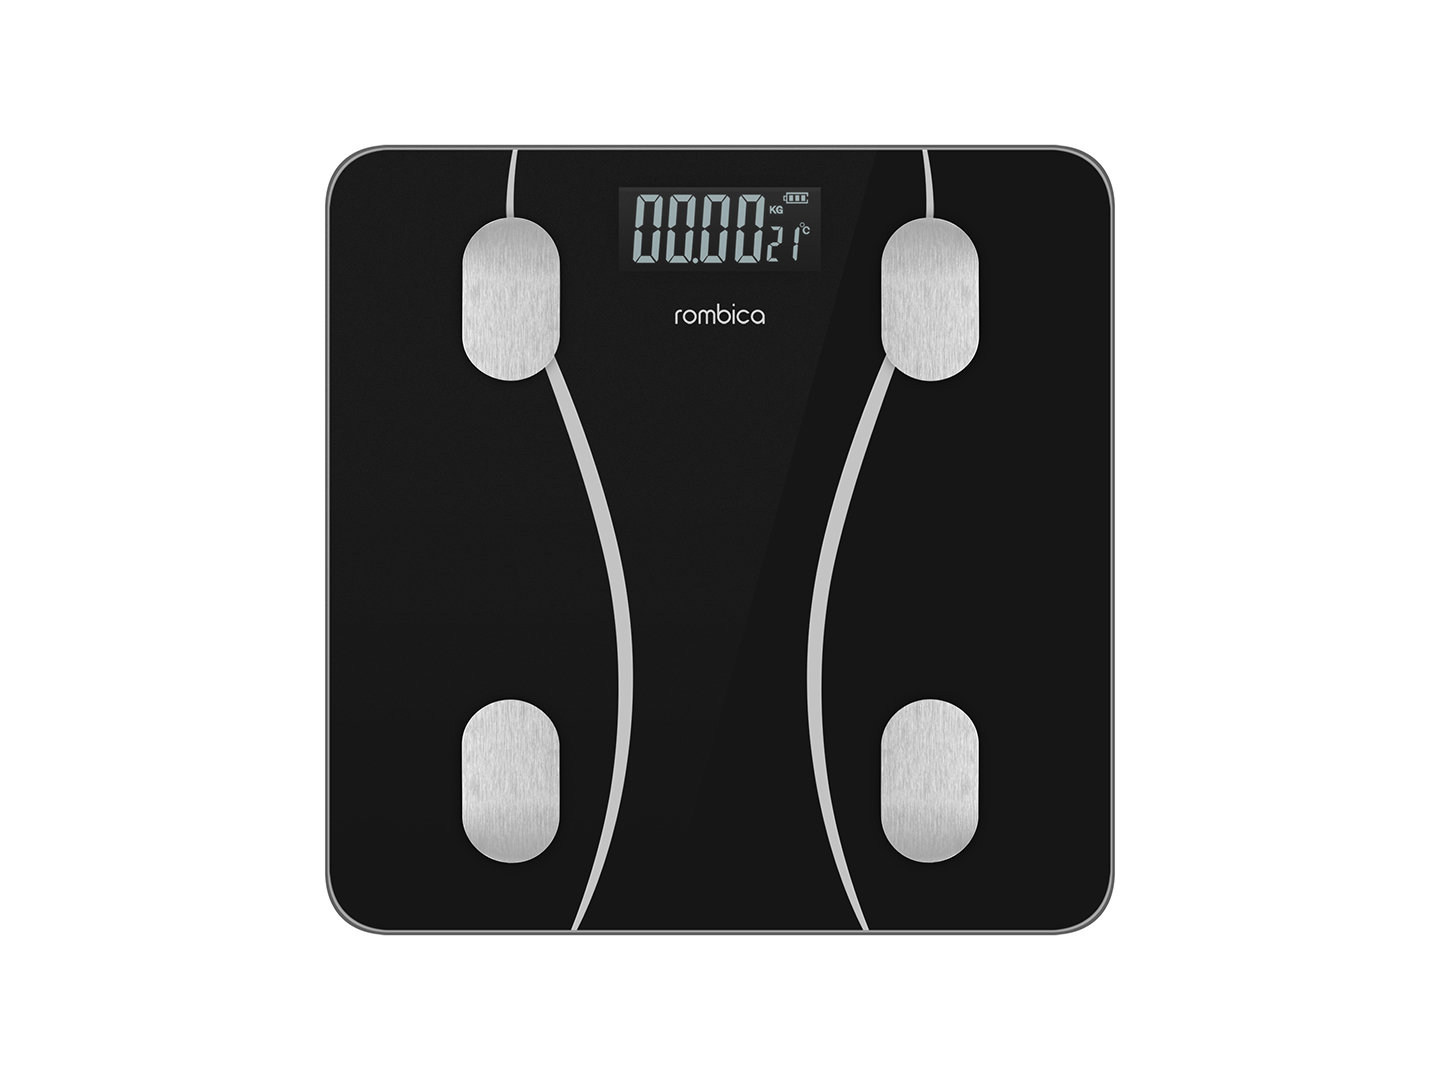 Scale Fit - 